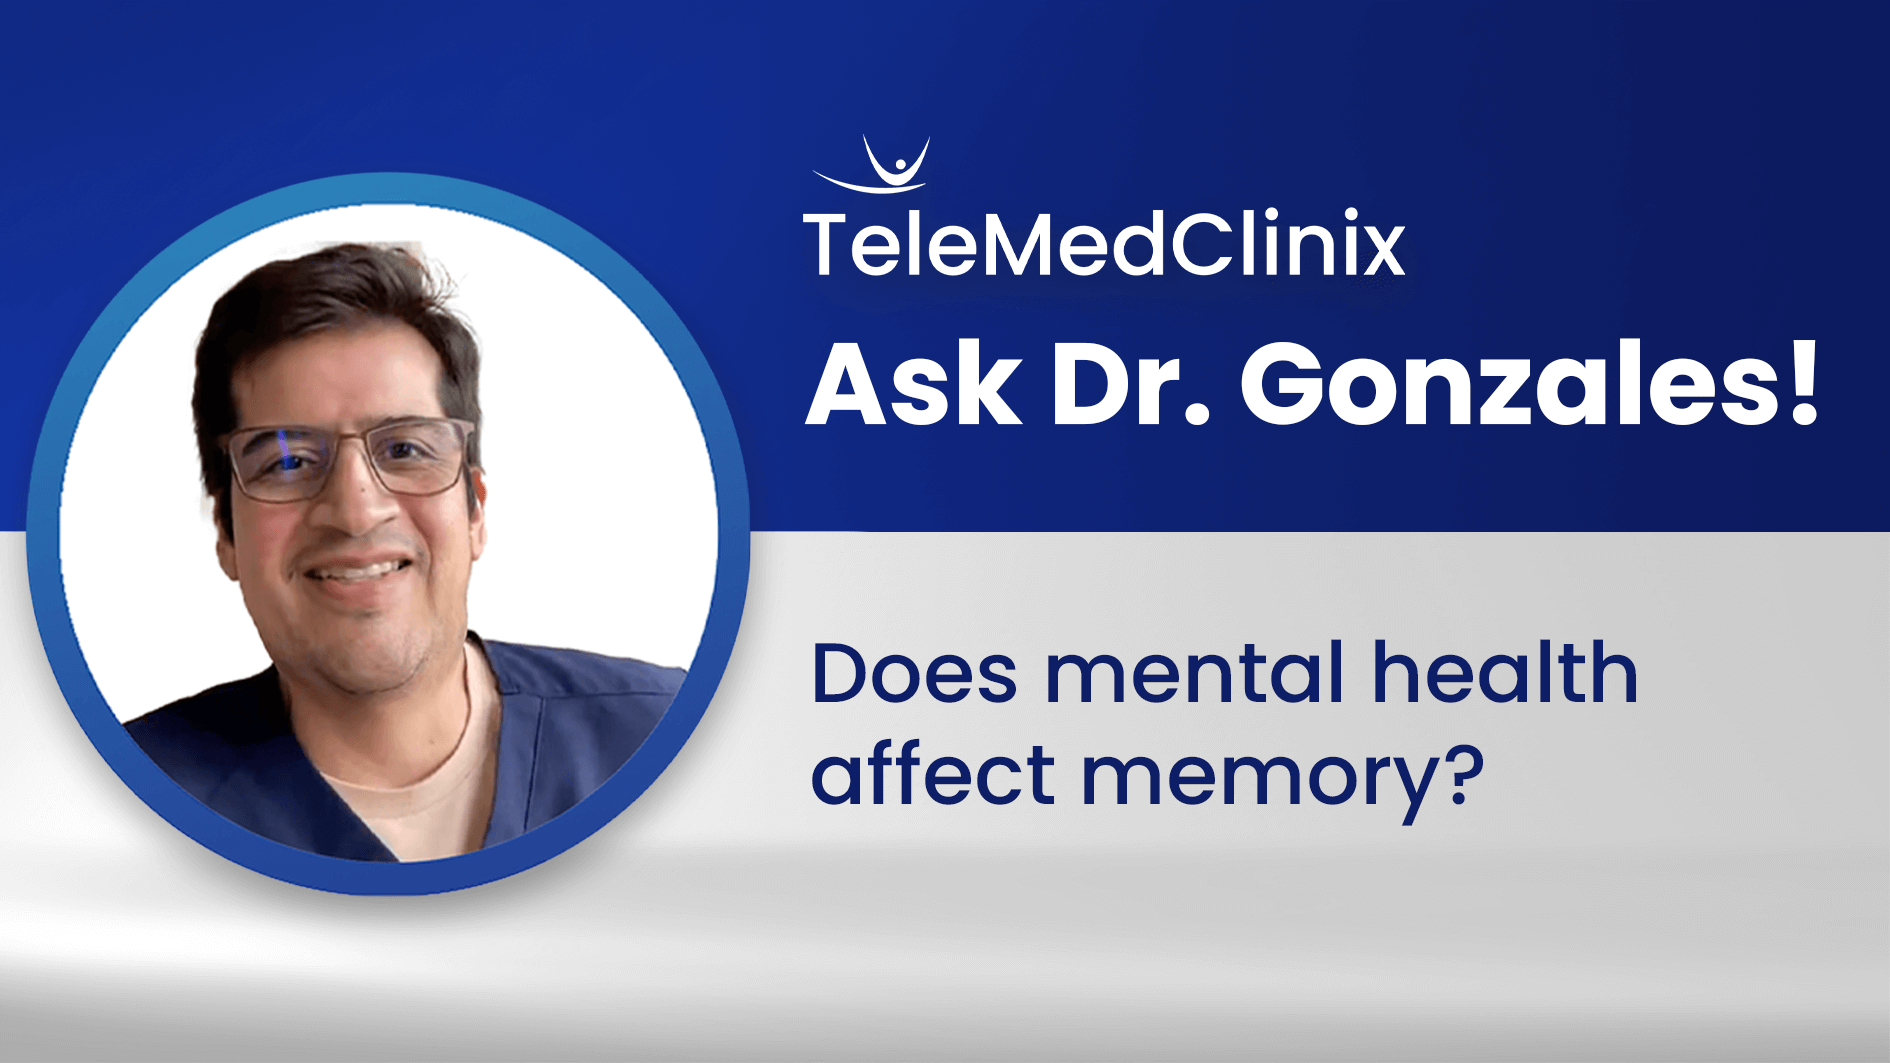 Does mental health affect memory?